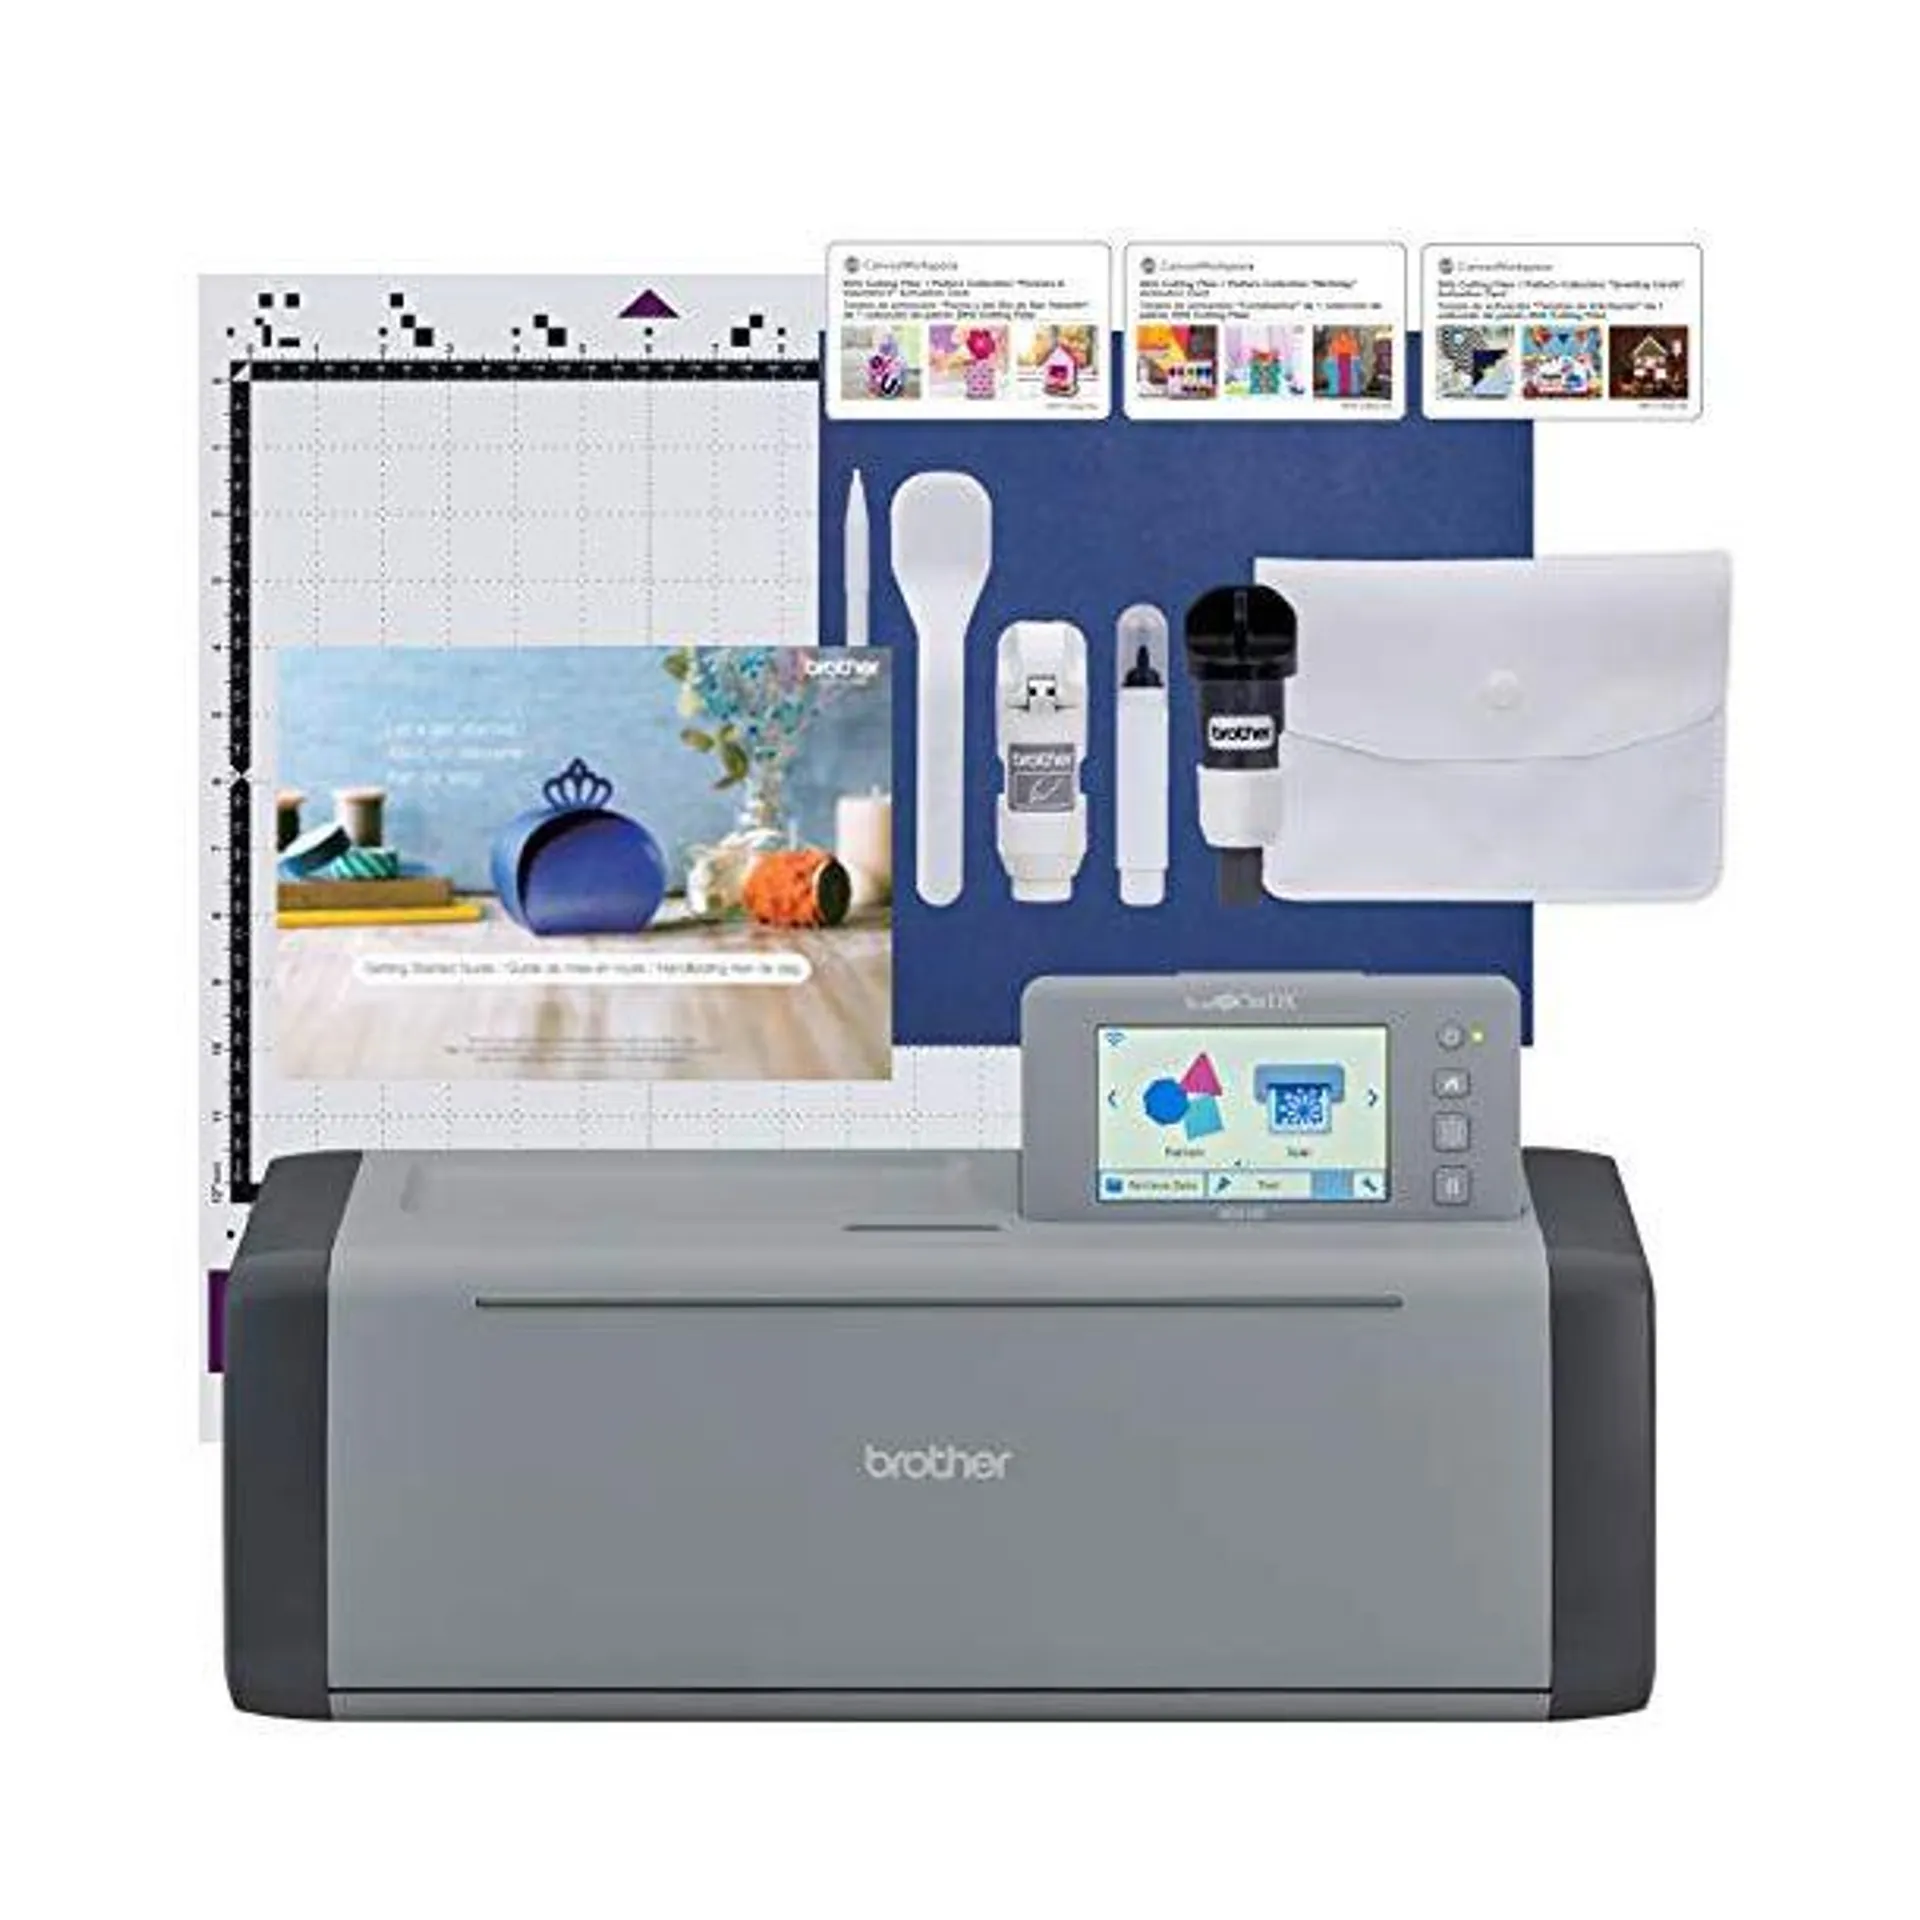 Brother ScanNCut SDX125EGY Electronic DIY Cutting Machine with Scanner, Make Custom Stickers, Vinyl Wall Art, Greeting Cards and More with 682 Included Patterns, Grey